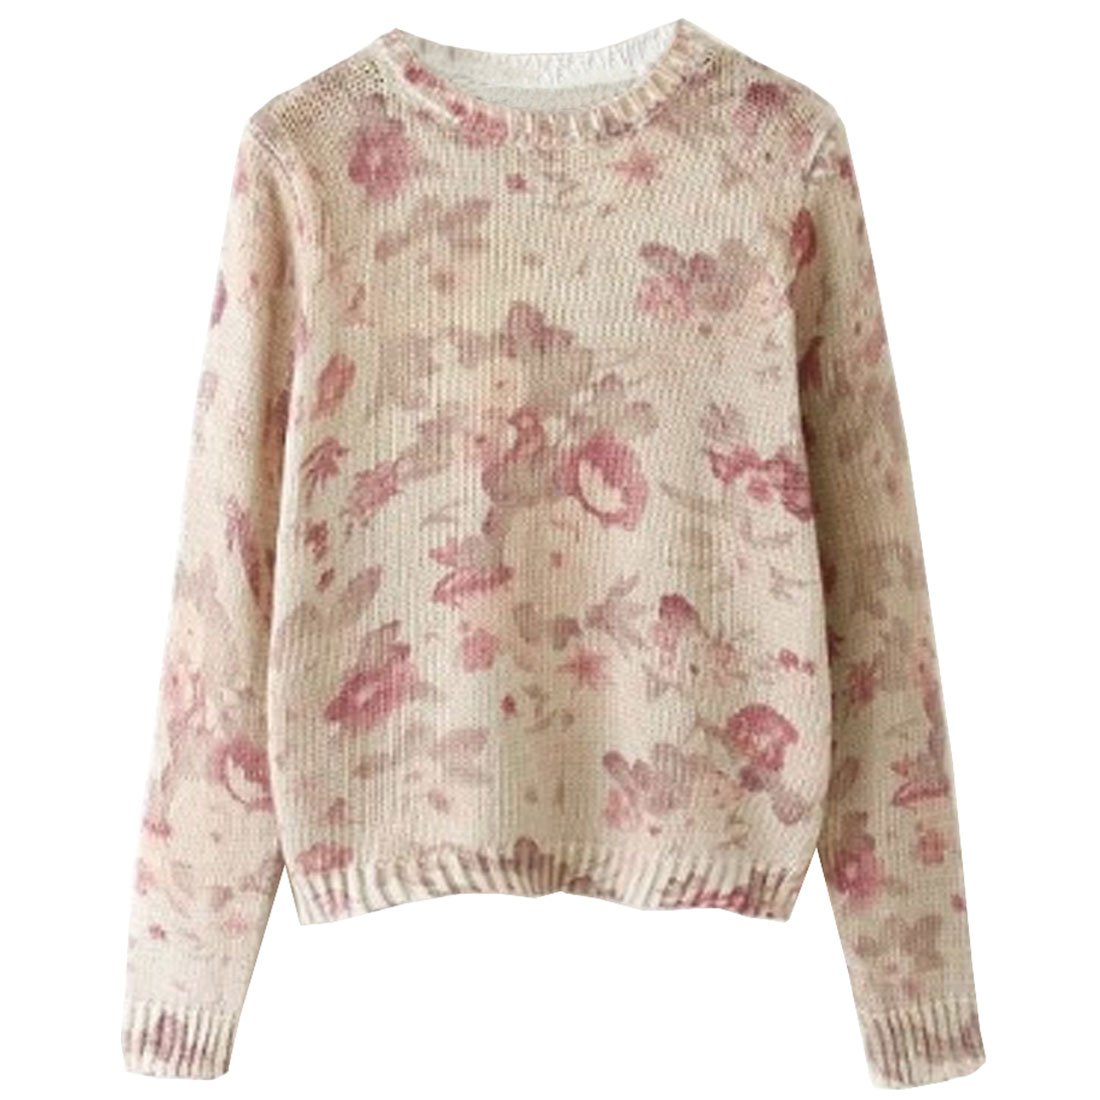 OASAP Women Suble Floral Print Pullover Ribbed Sweater, multi, M, OP54799